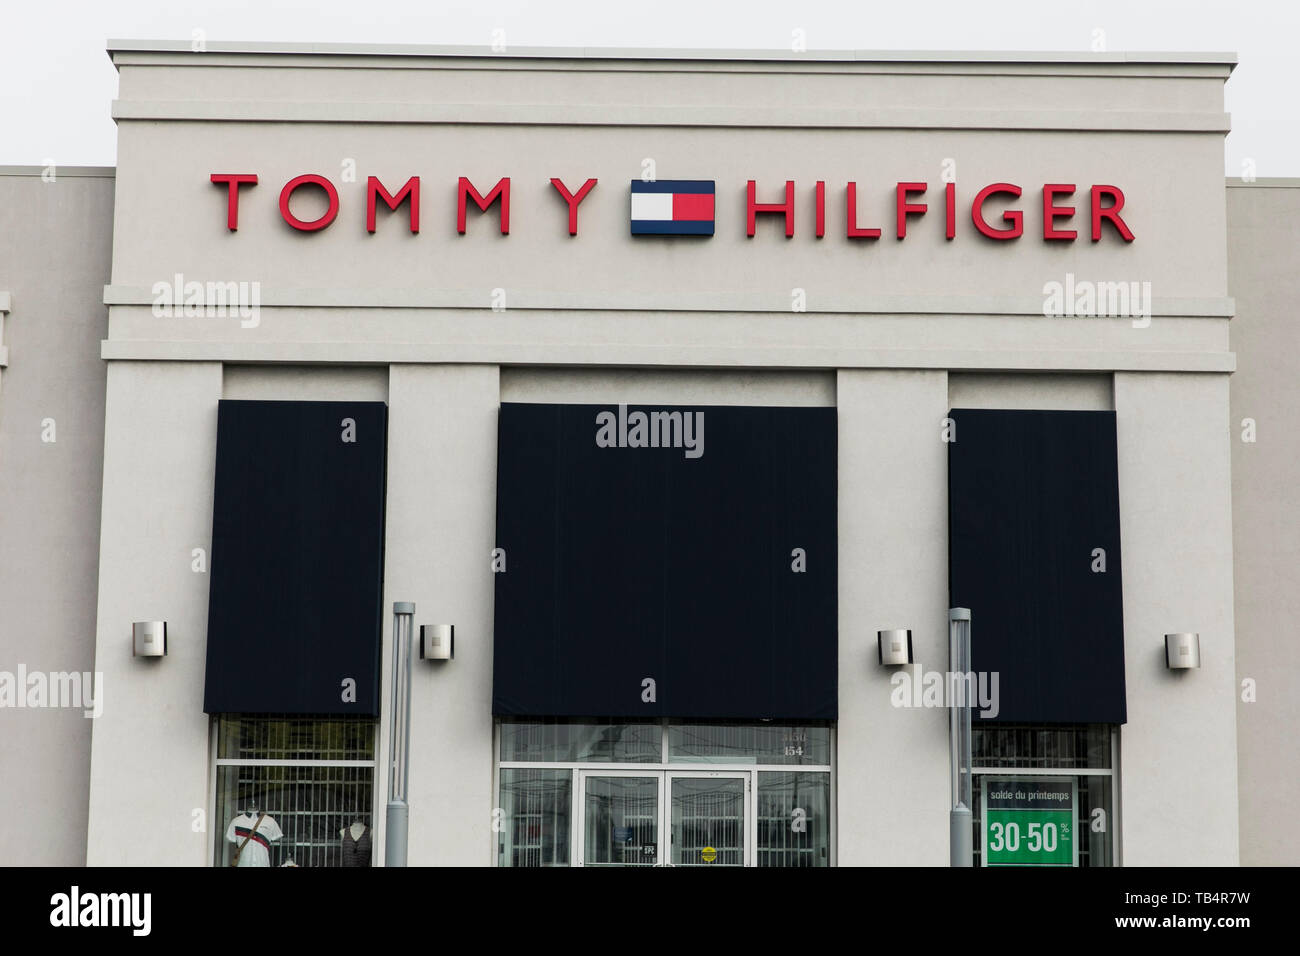 A logo sign outside of a Tommy Hilfiger retail store location in  Vaudreuil-Dorion, Quebec, Canada, on April 21, 2019 Stock Photo - Alamy